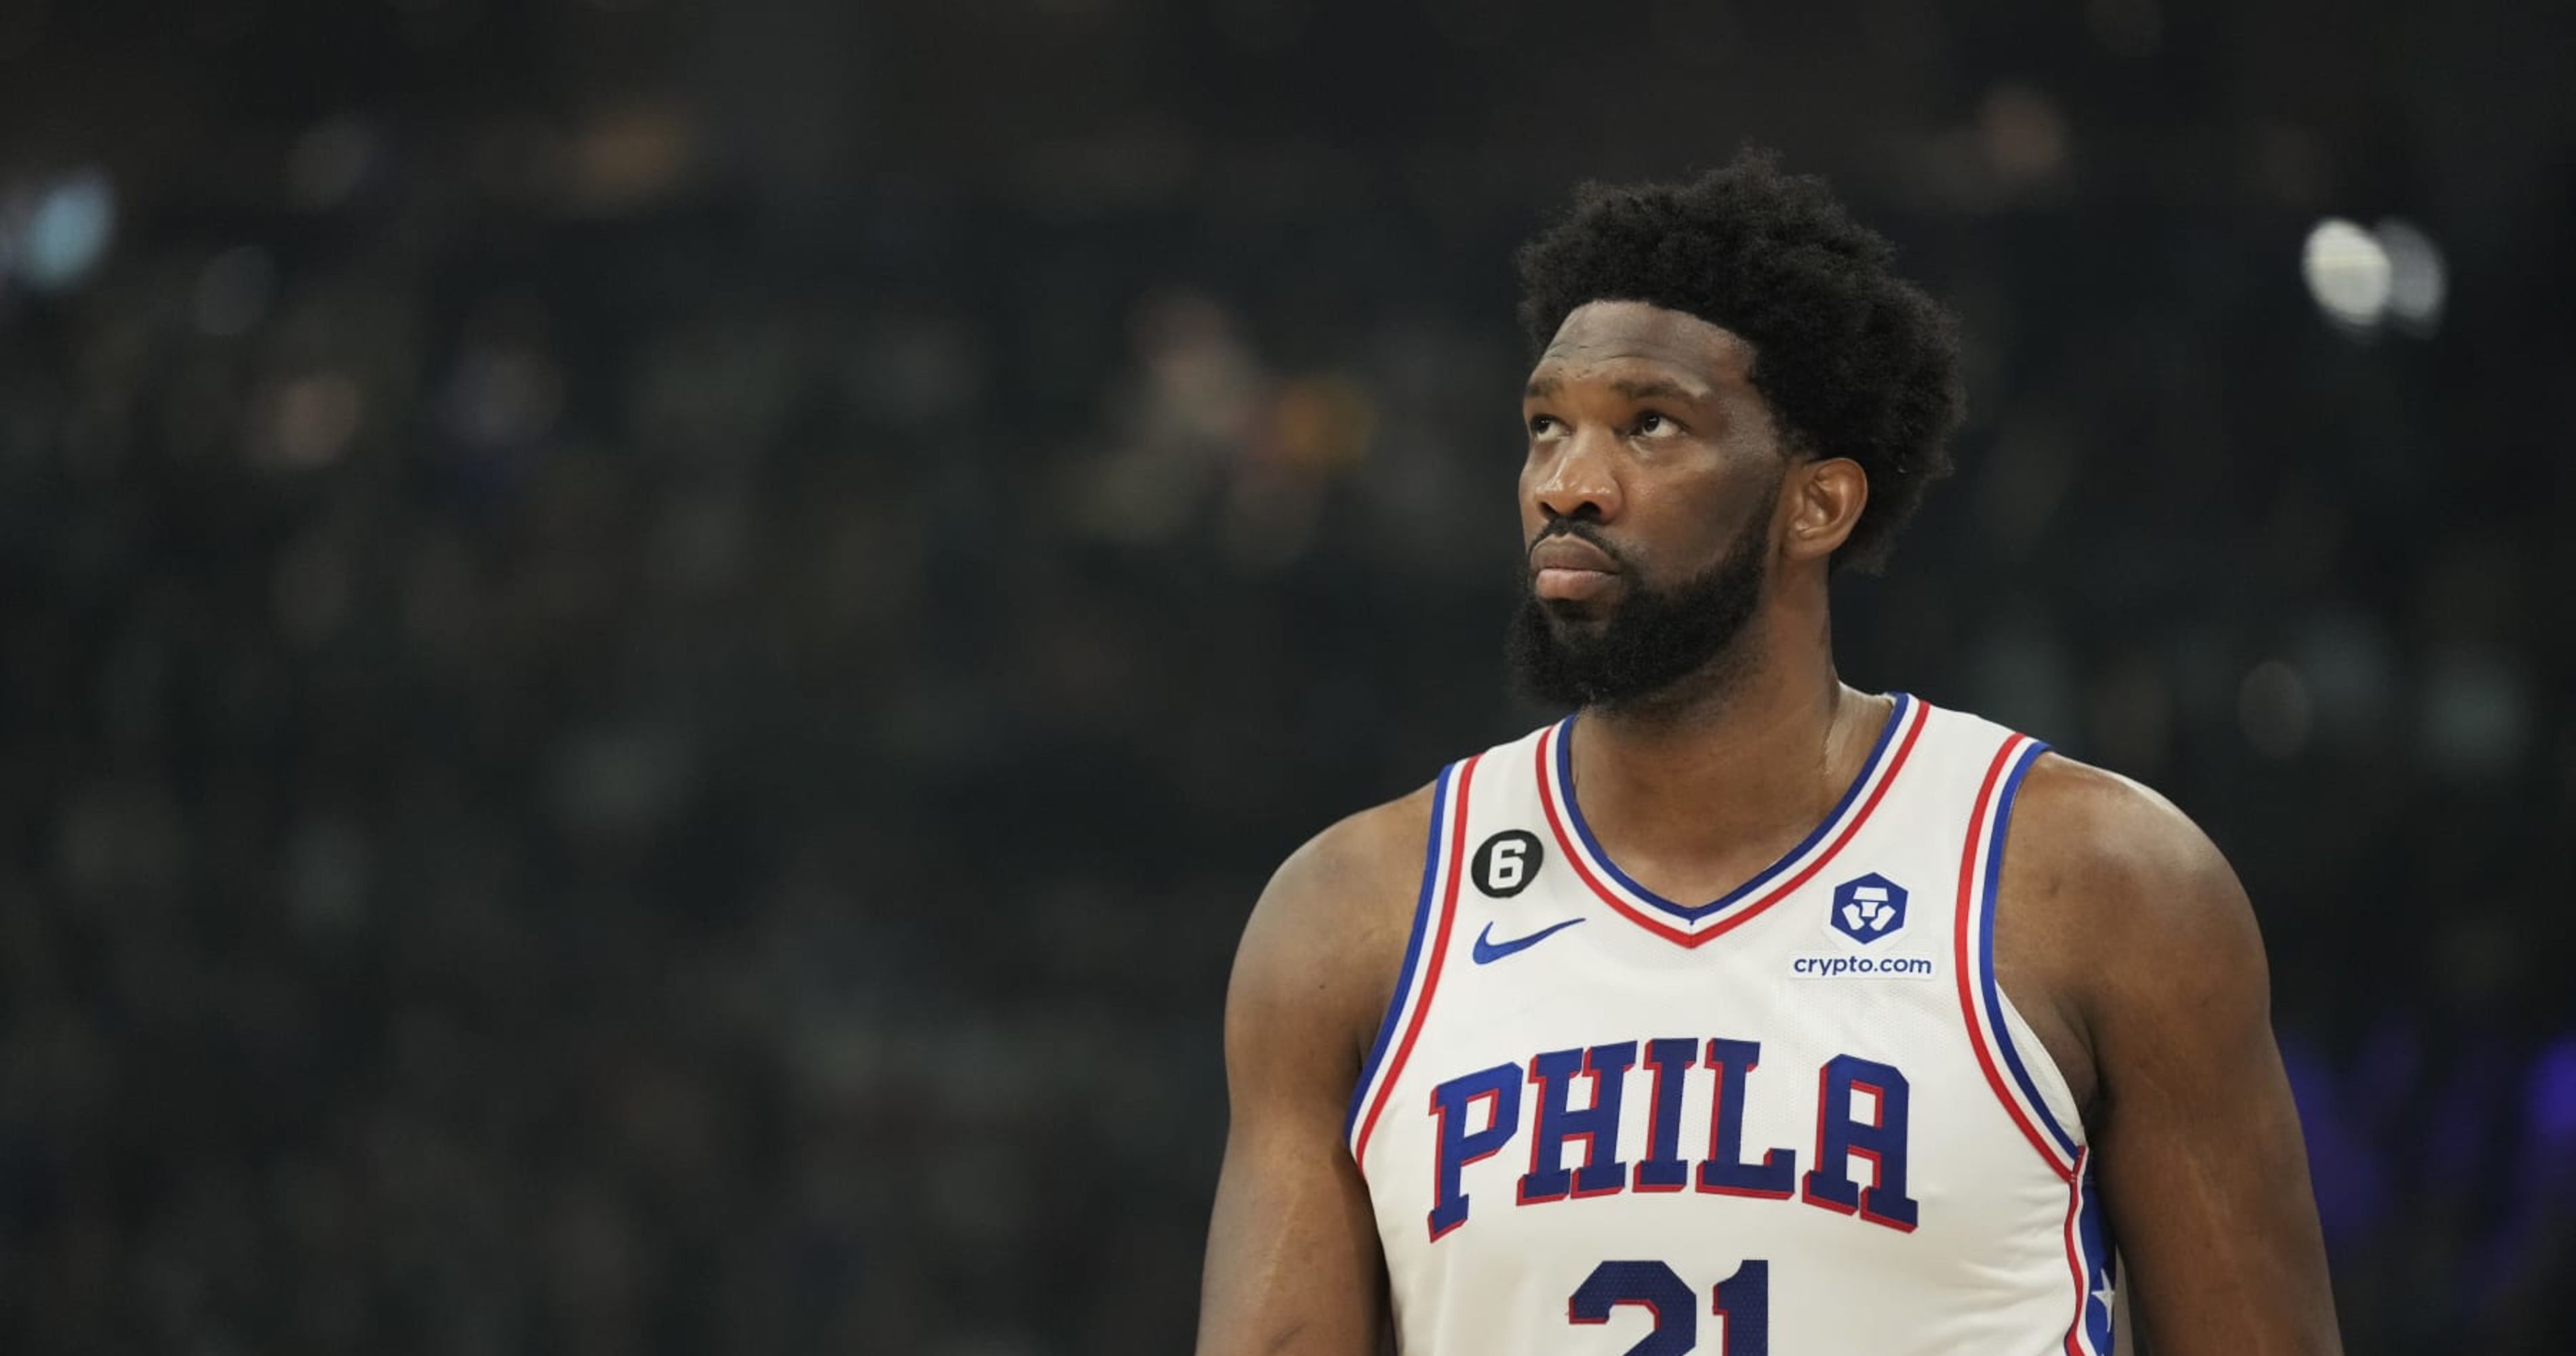 What Would It Take for Joel Embiid to Win NBA MVP?